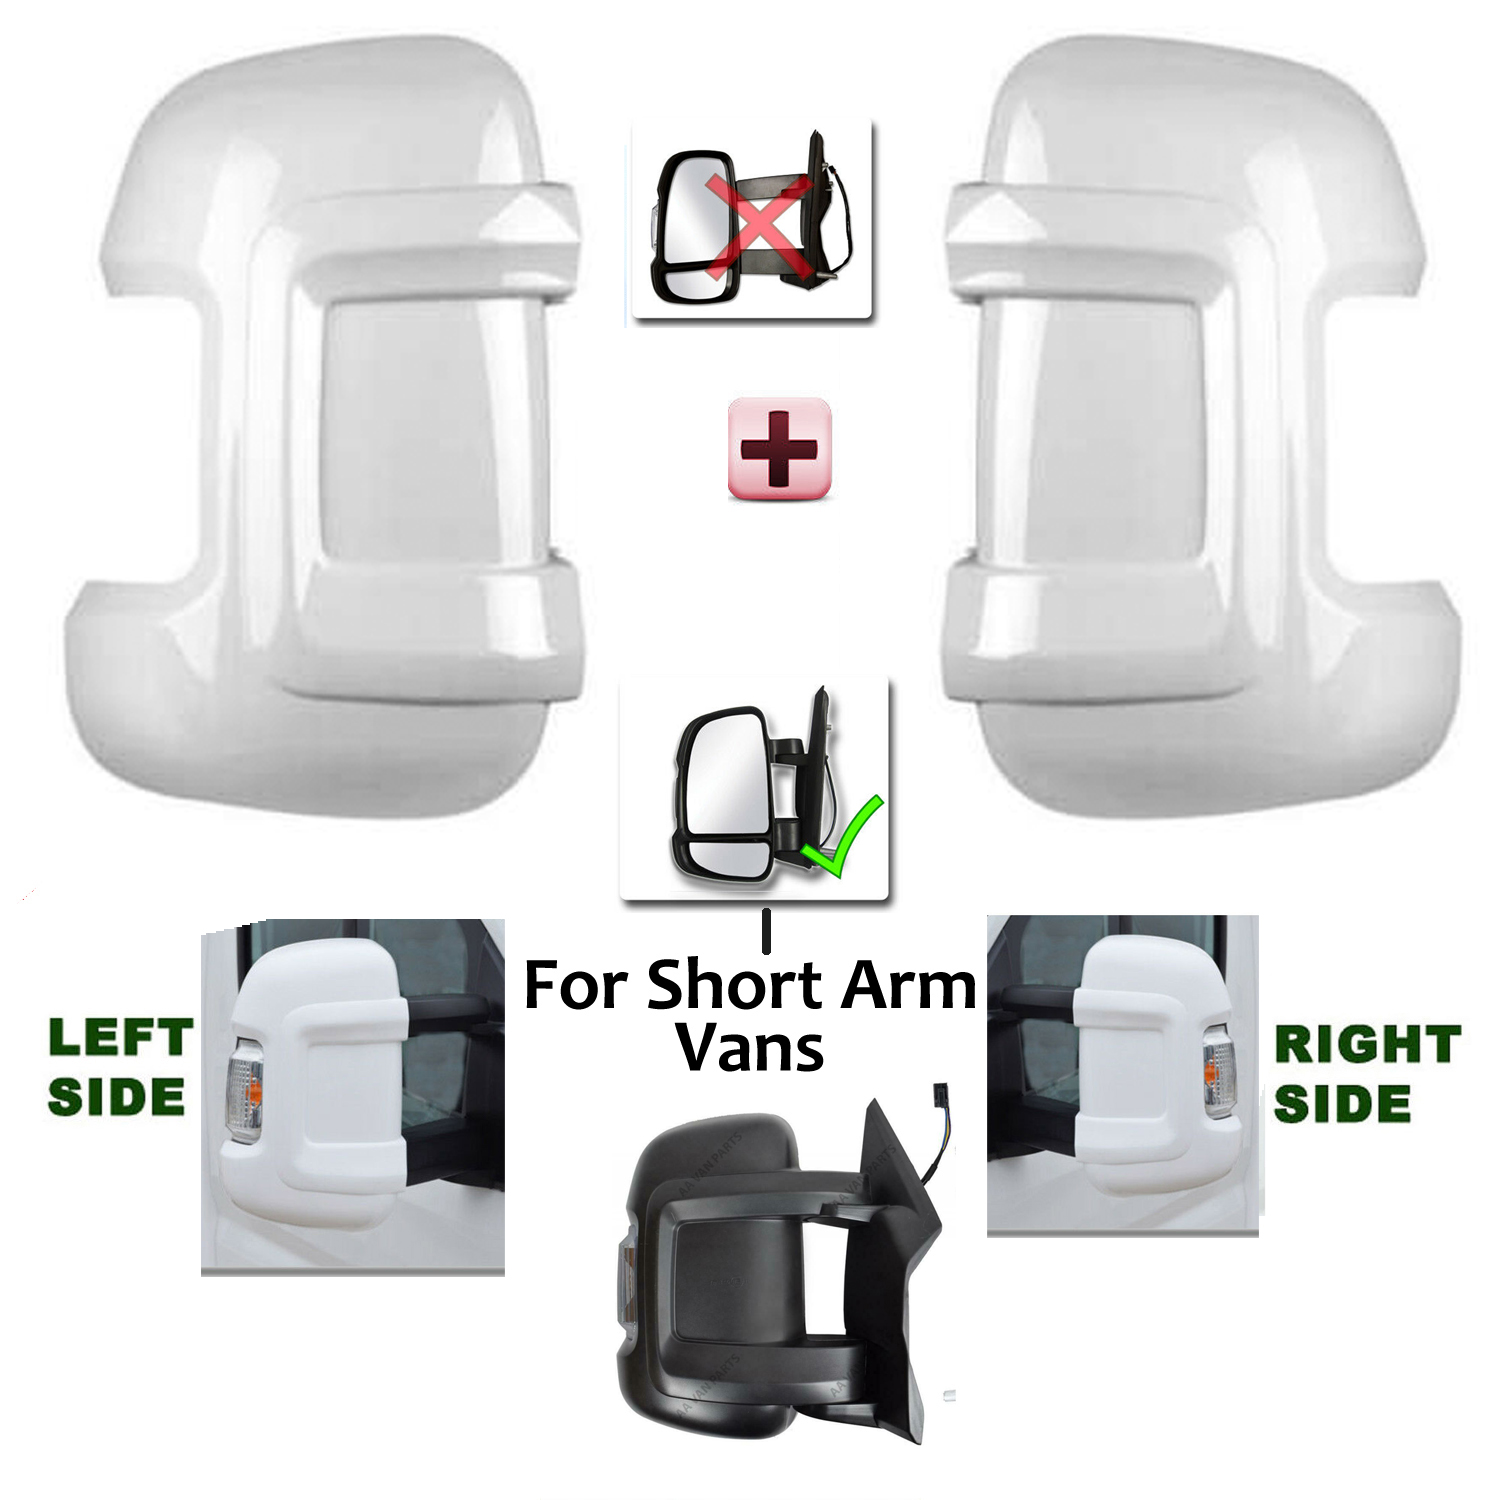 Citroen Relay Wing Mirror Cover Protectors LEFT and RIGHT (PAIR ) 2006 to 2021 – Gloss White Wing Mirror Cover Protector ( SHORT Aarm Vans )